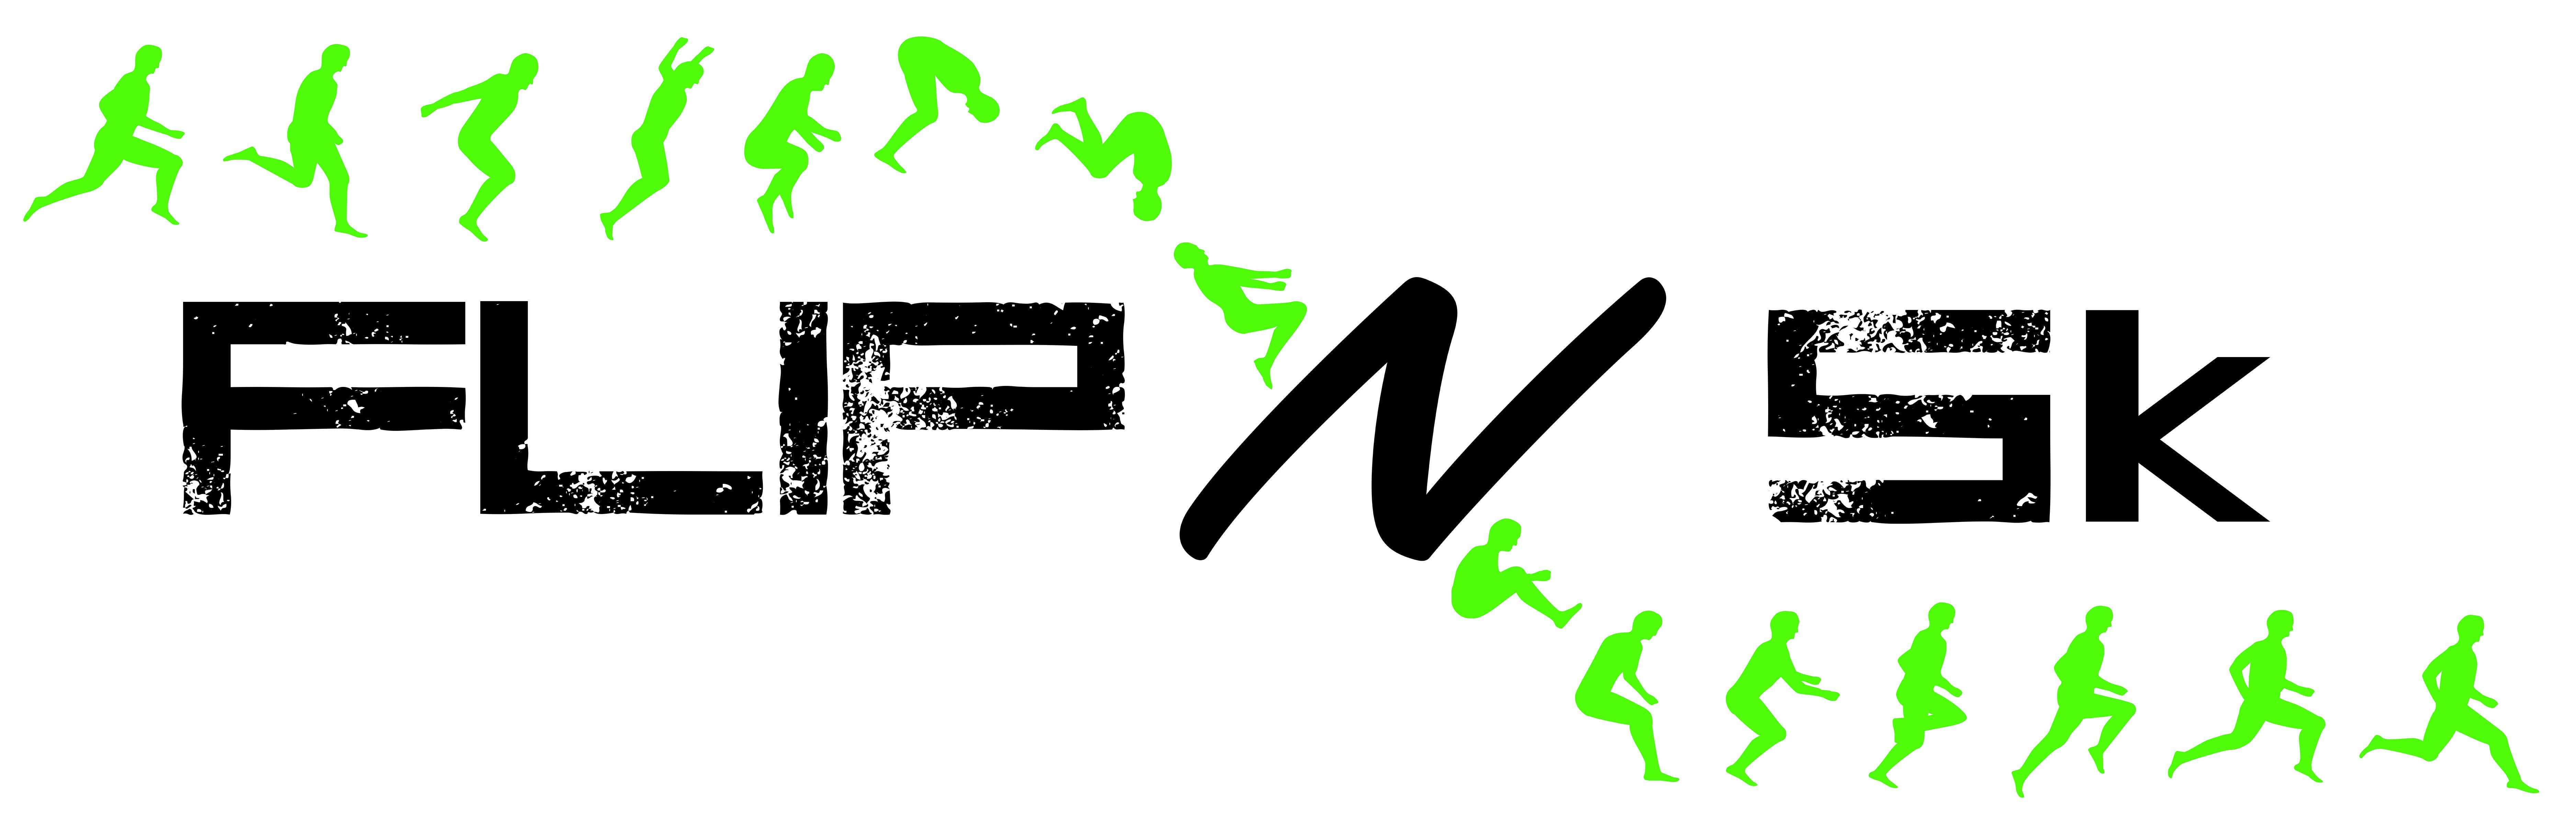 Flip Logo - Flip N 5K – August 10, 2019 | NC Race Timing and Running Events | Go ...